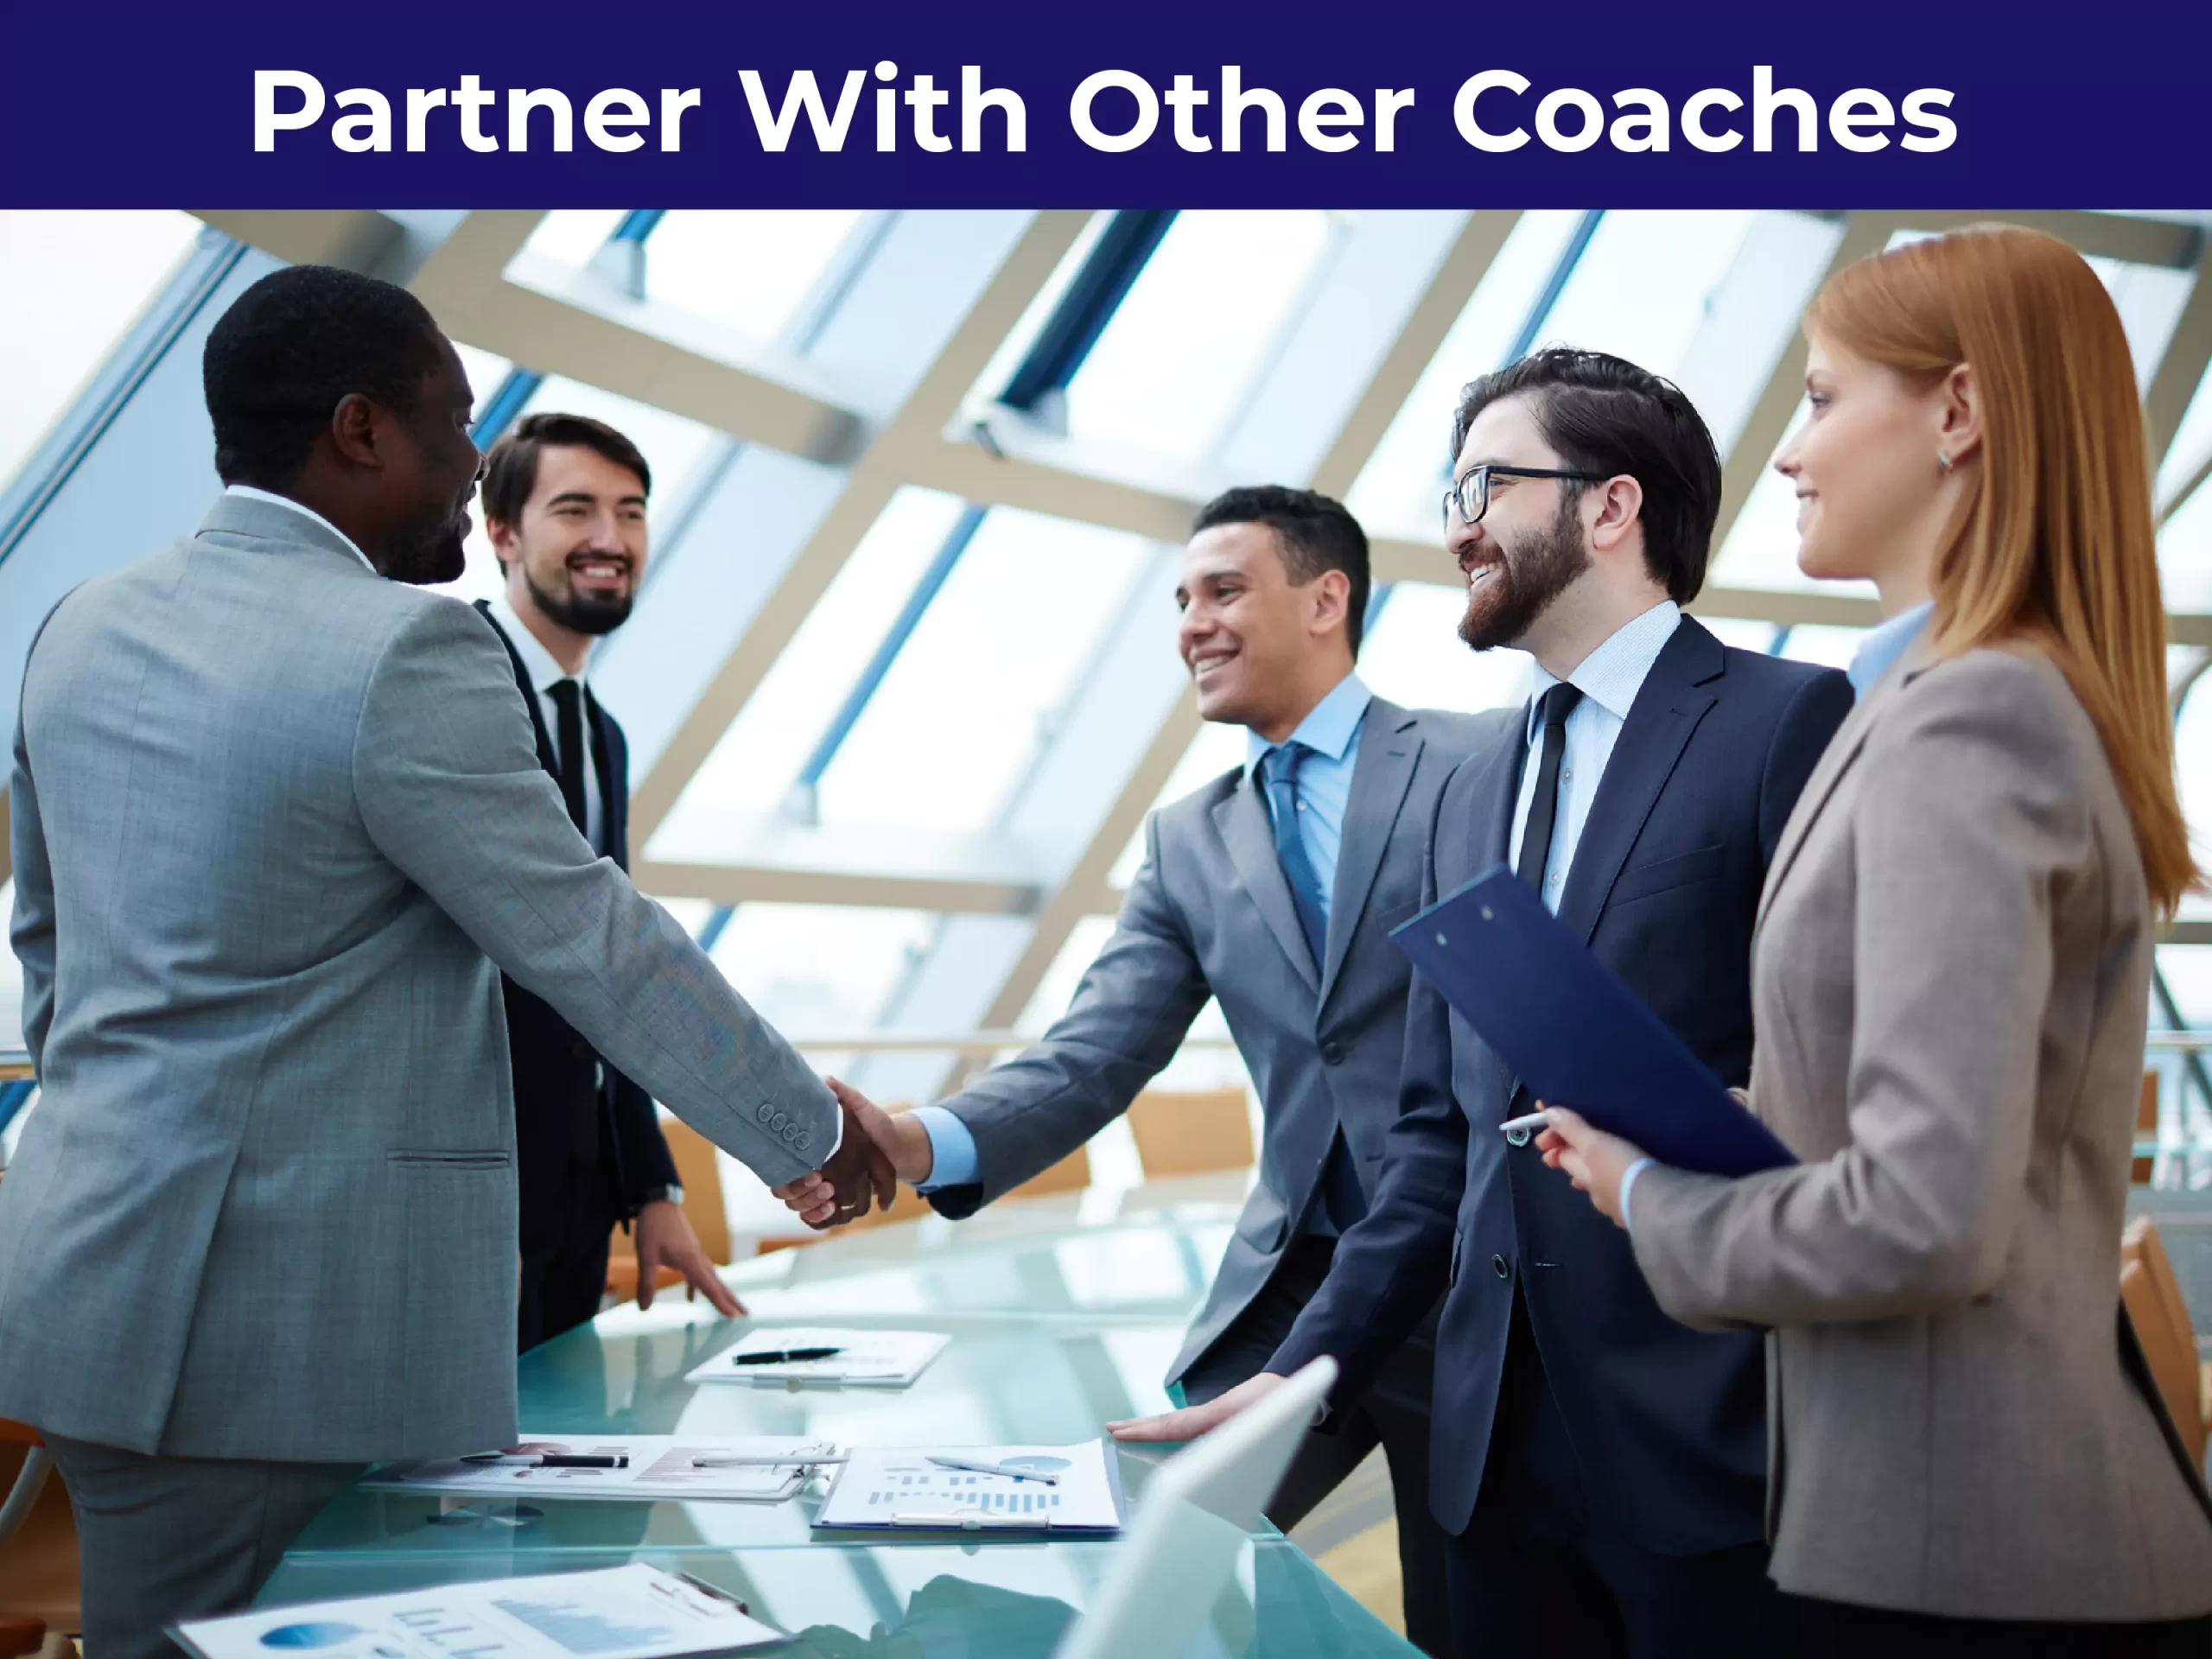 Partner With Other Coaches